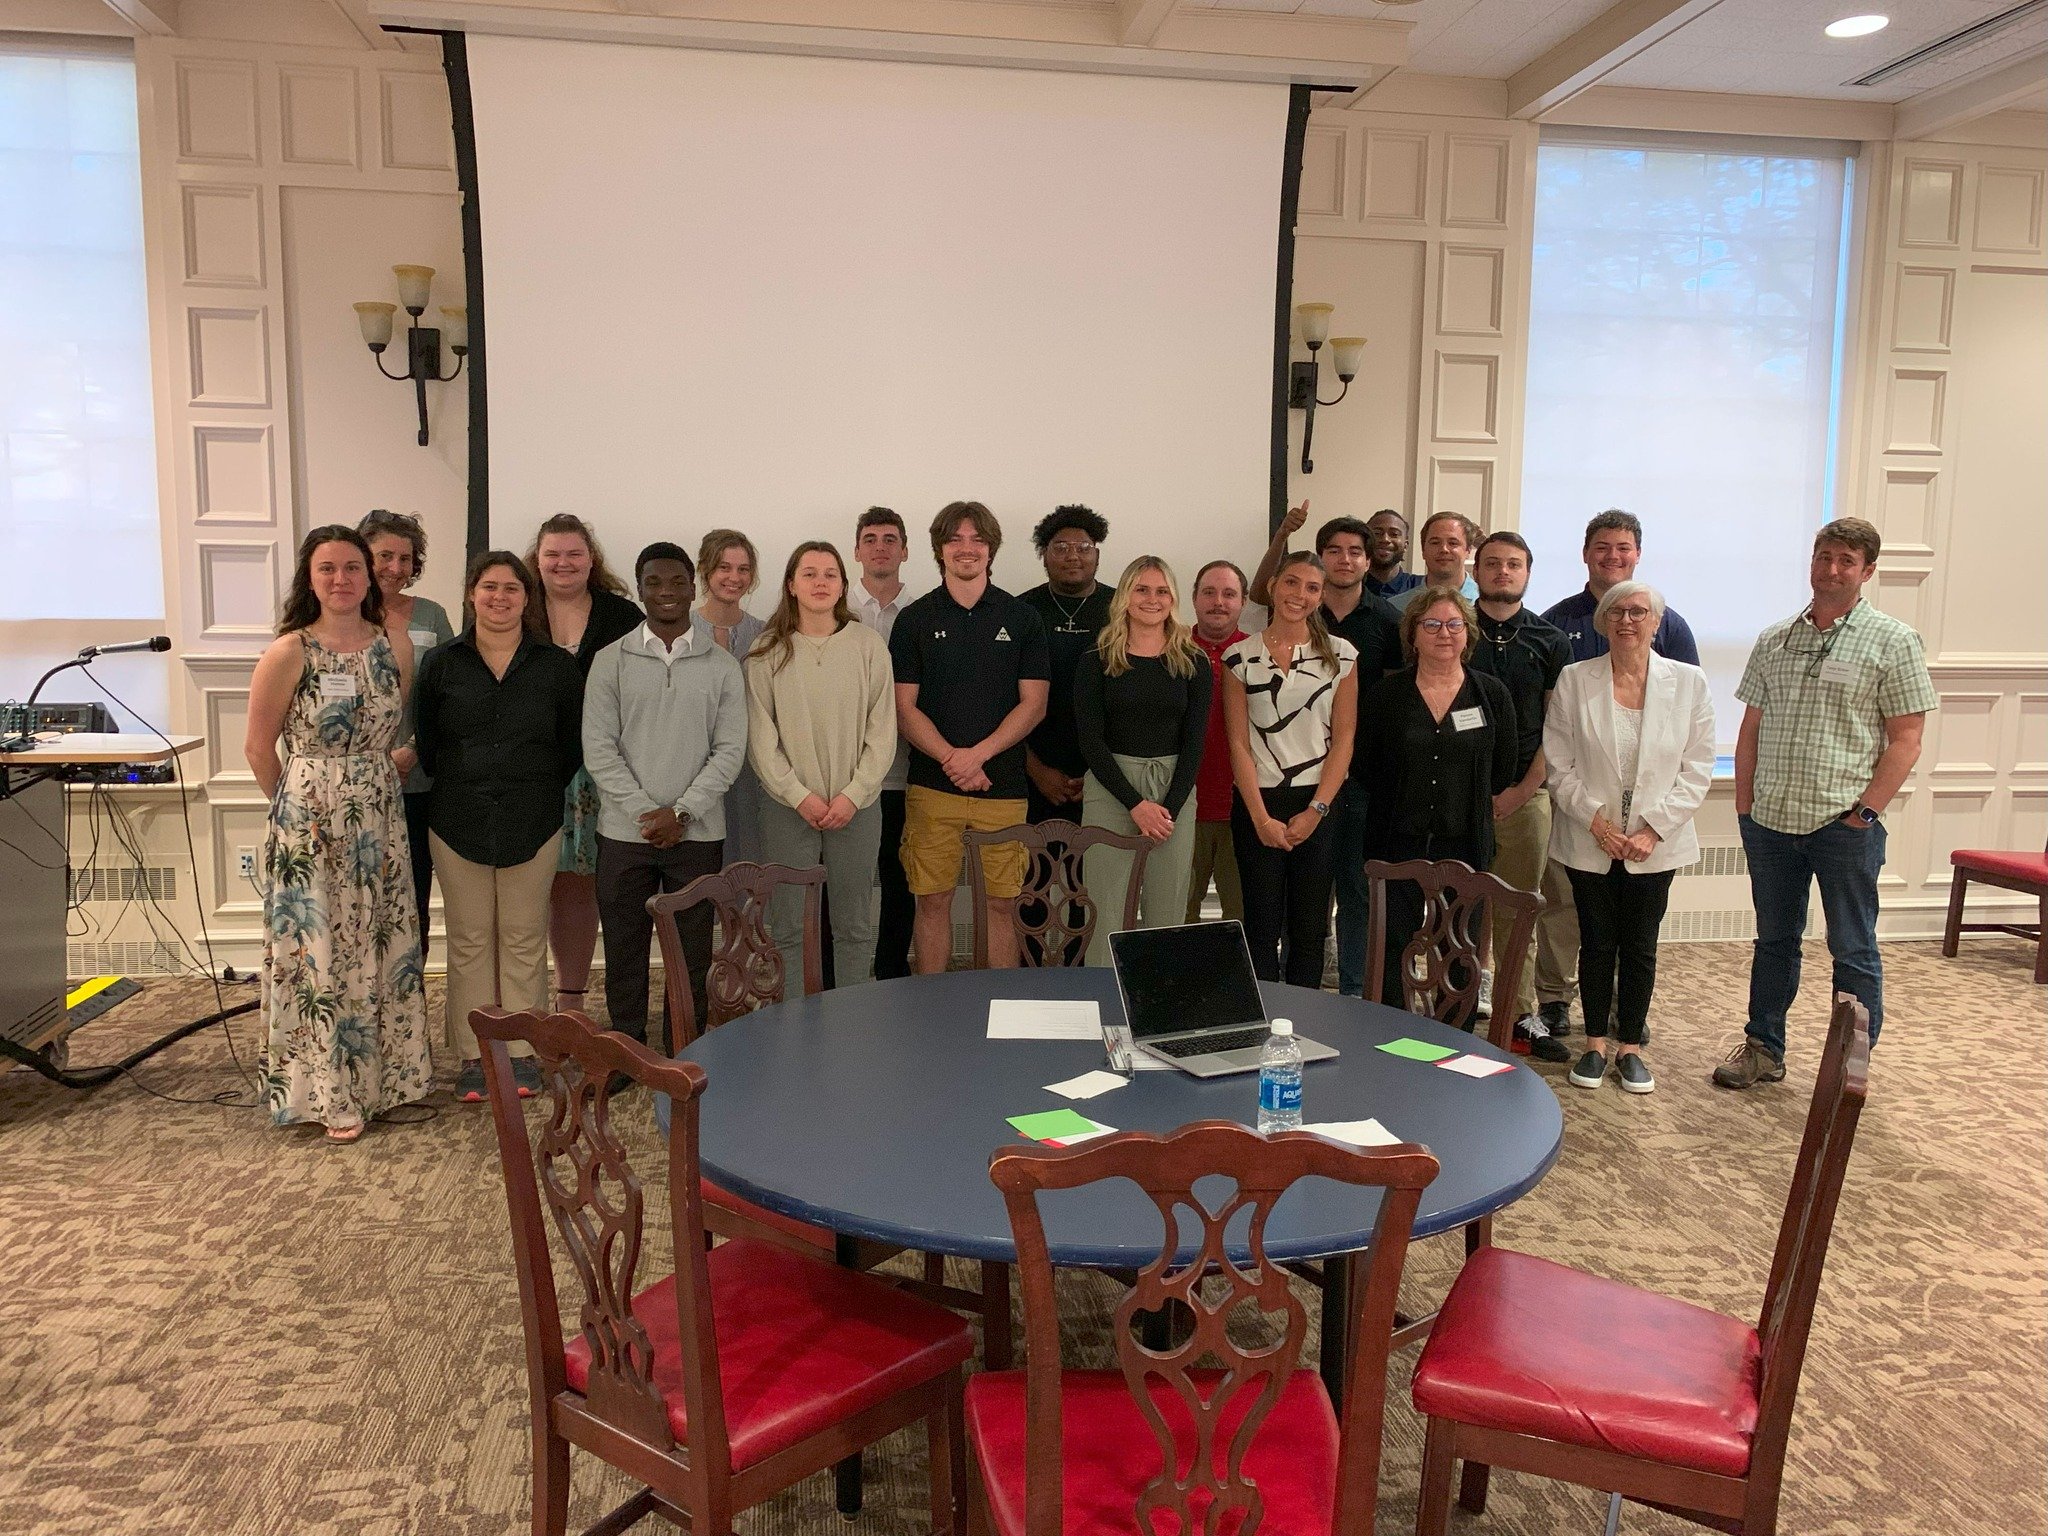 We were privileged enough this semester to work with two classes of students from @lycomingcollege. One class educated us as to how our local businesses can better market to our college communities, while the other focused on the development of a wor